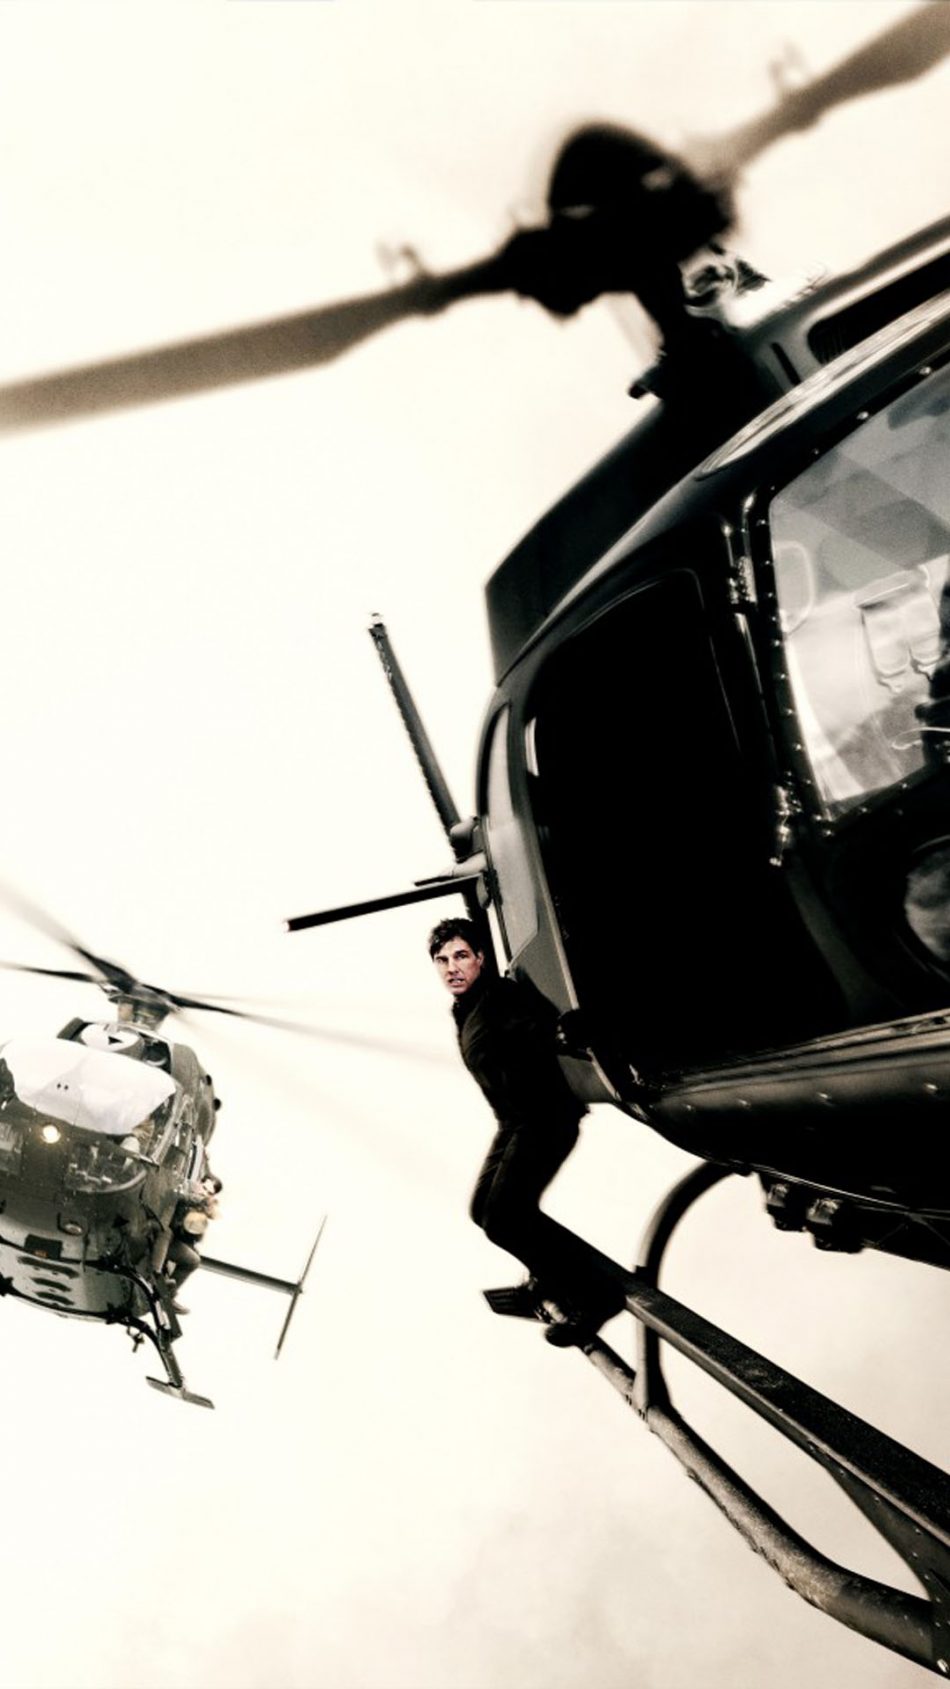 Tom Cruise Chopper Action In Mission Impossible Fallout HD Mobile Wallpaper